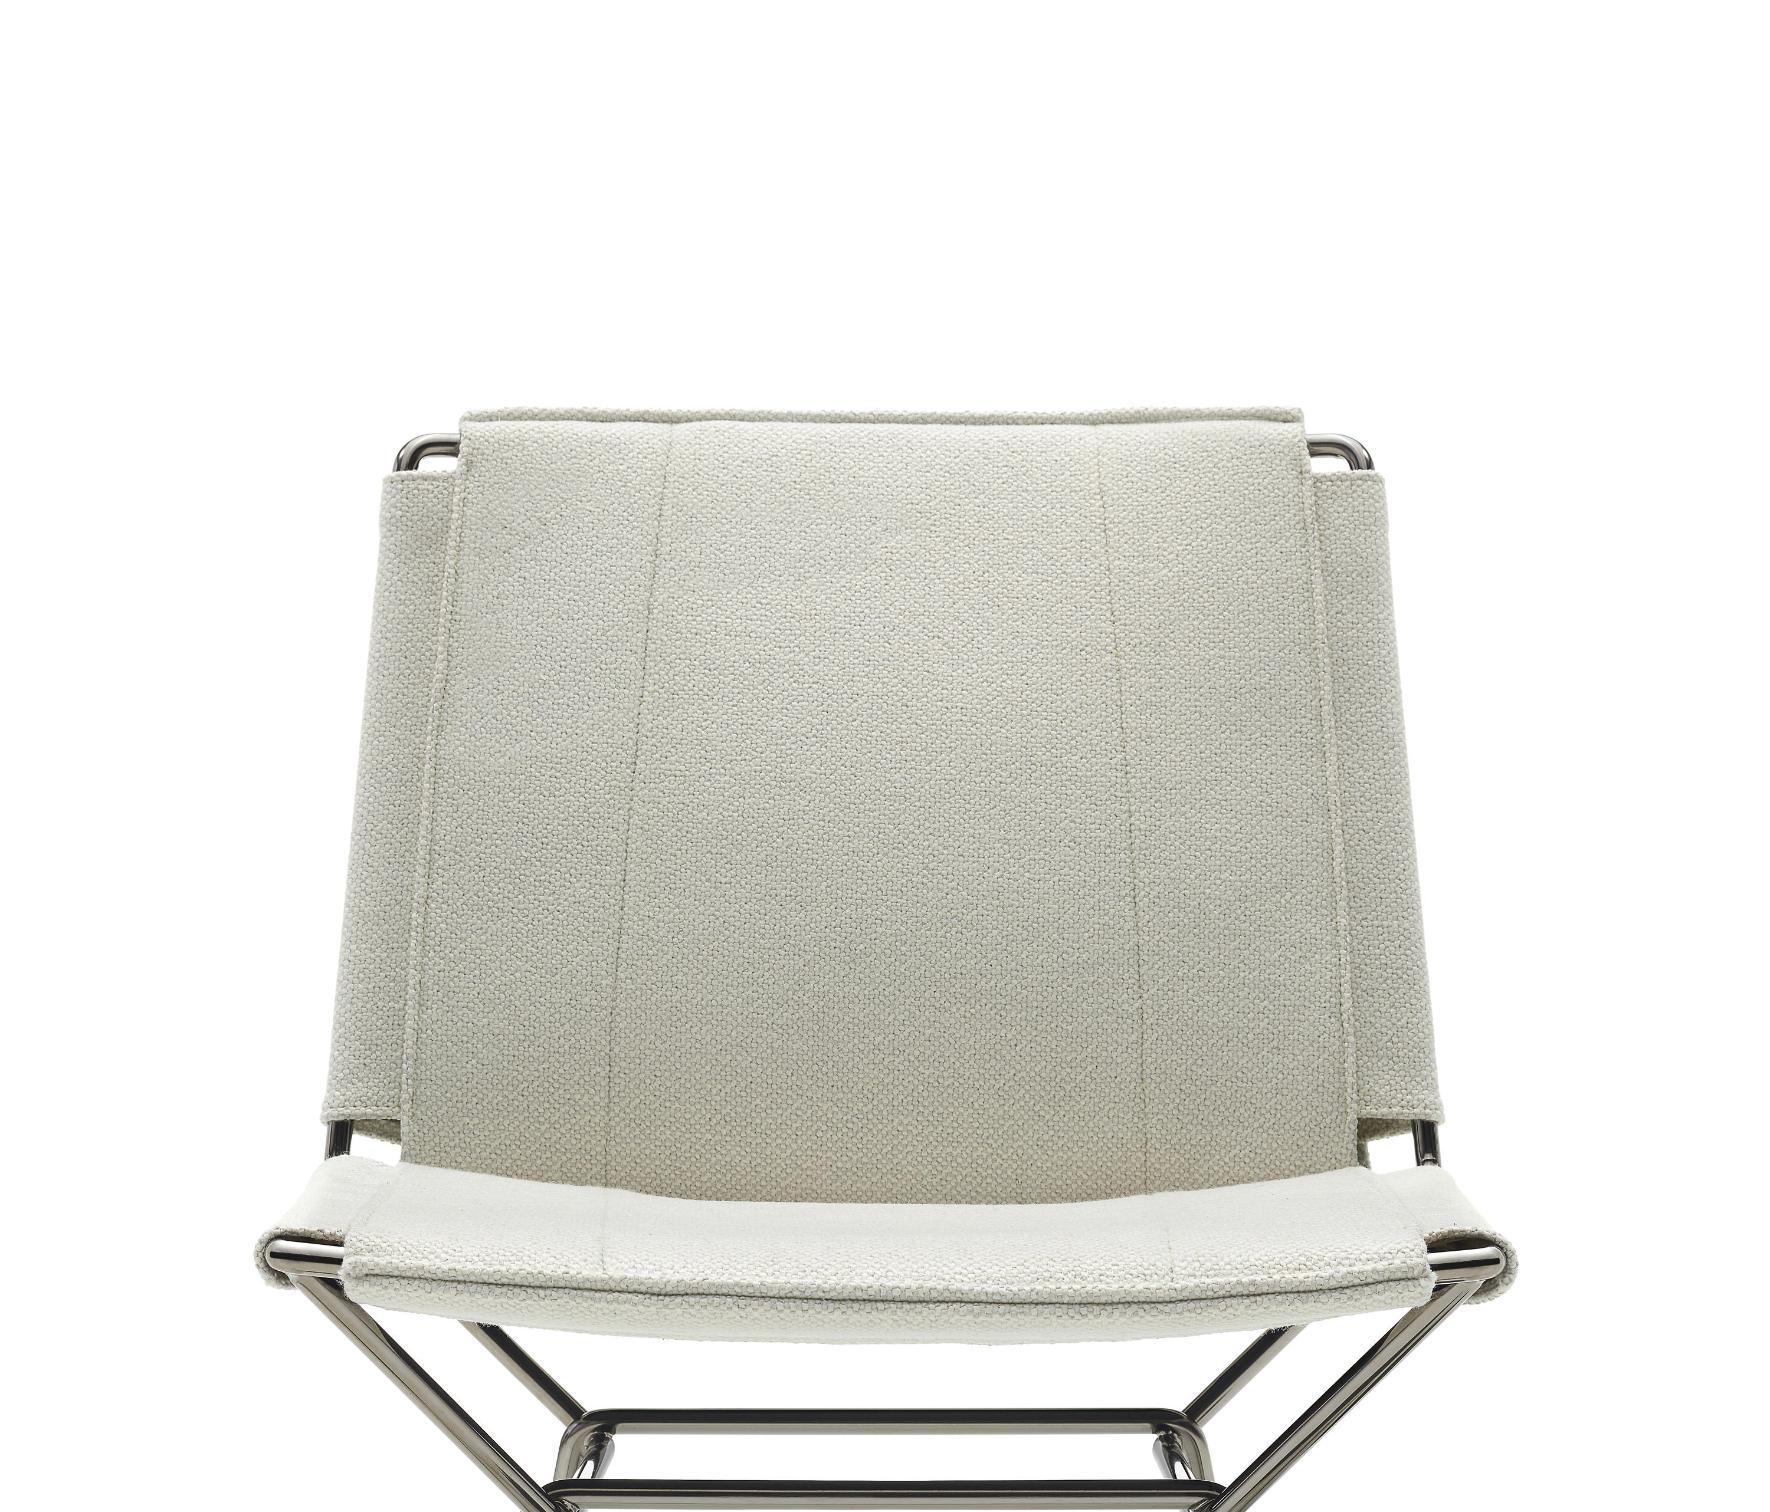 Neil Elegance Textile Stool ☞ Color: White R443 Col. 005 ☞ Dimensions: Height 96 cm